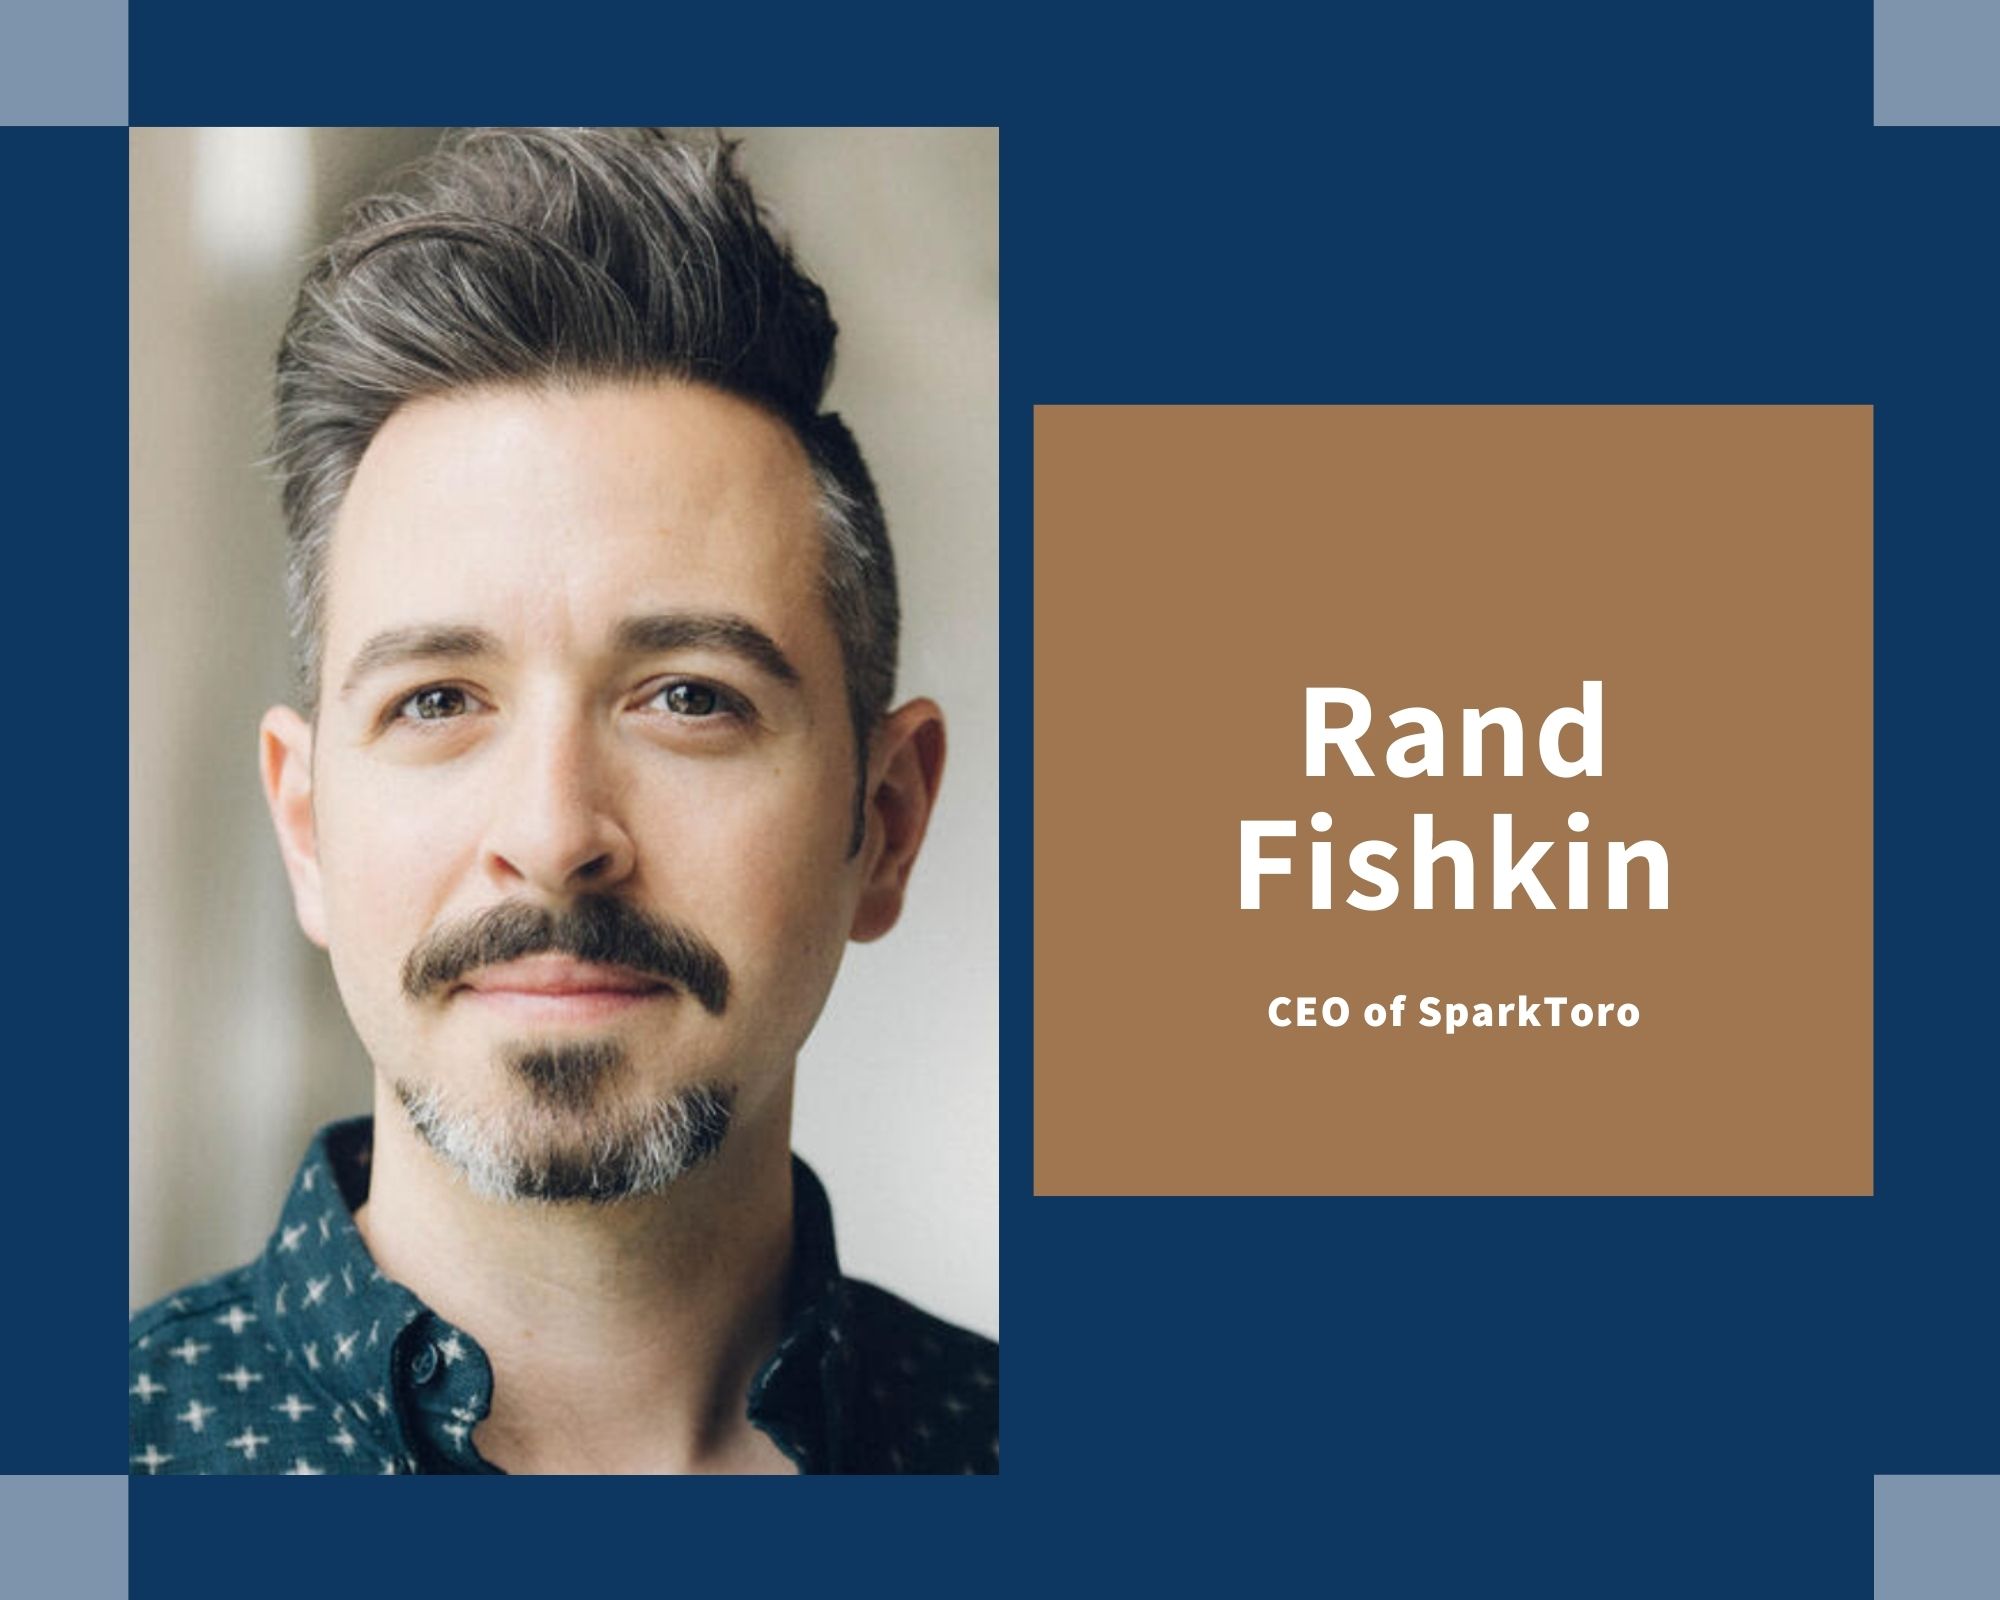 Rand Fishkin weighs in on the value of customer retention